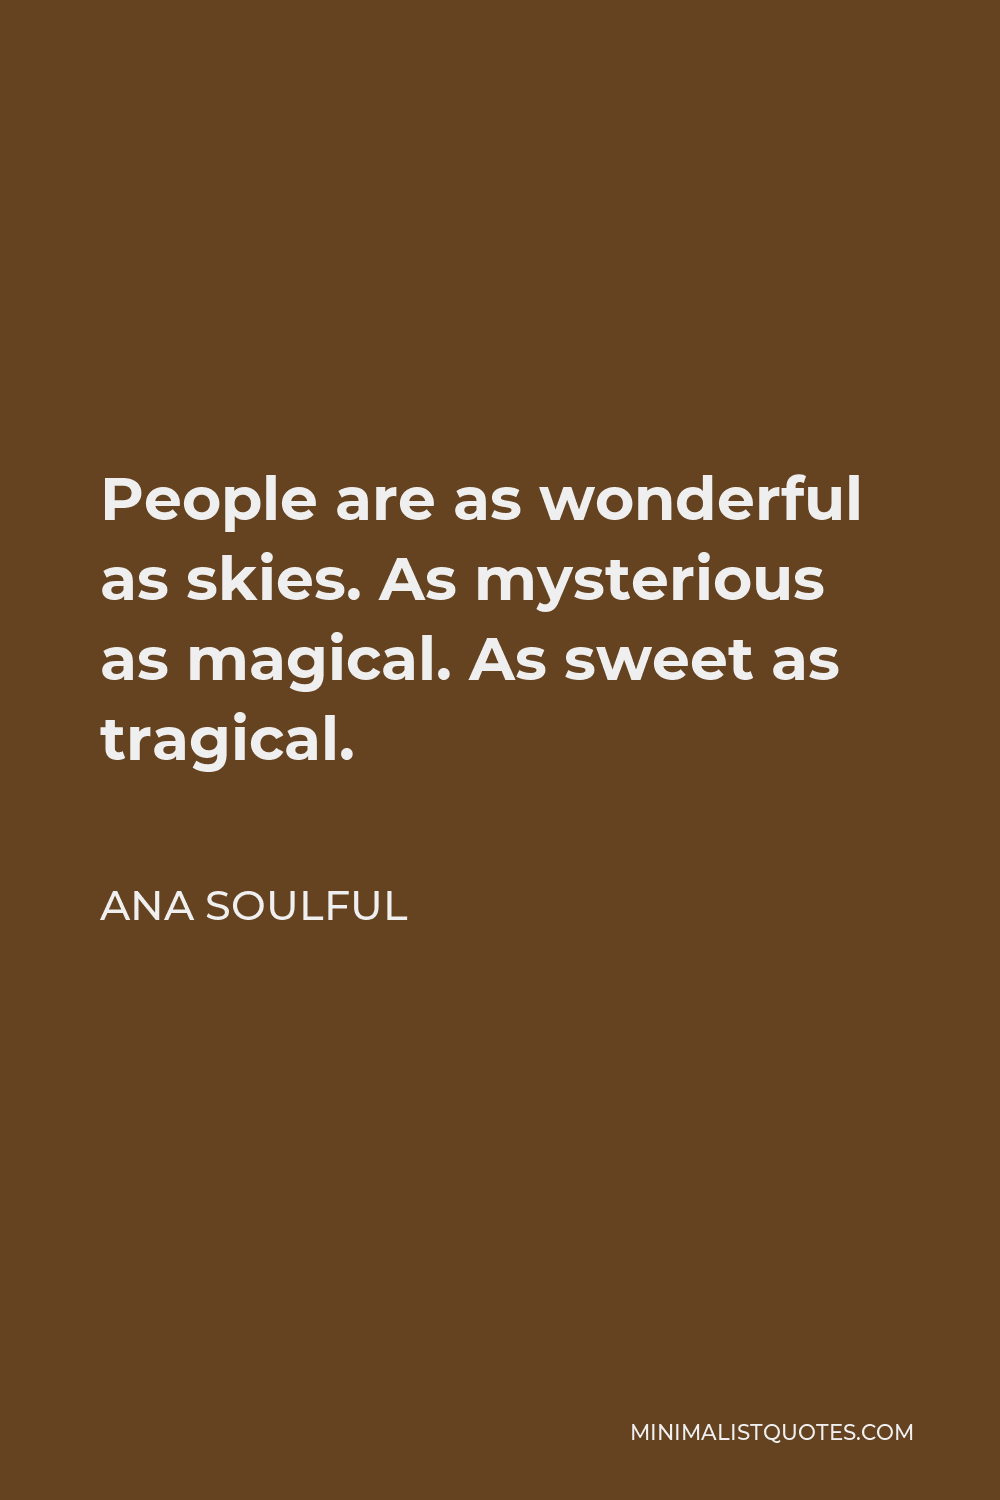 Ana Soulful Quote - People are as wonderful as skies. As mysterious as magical. As sweet as tragical.